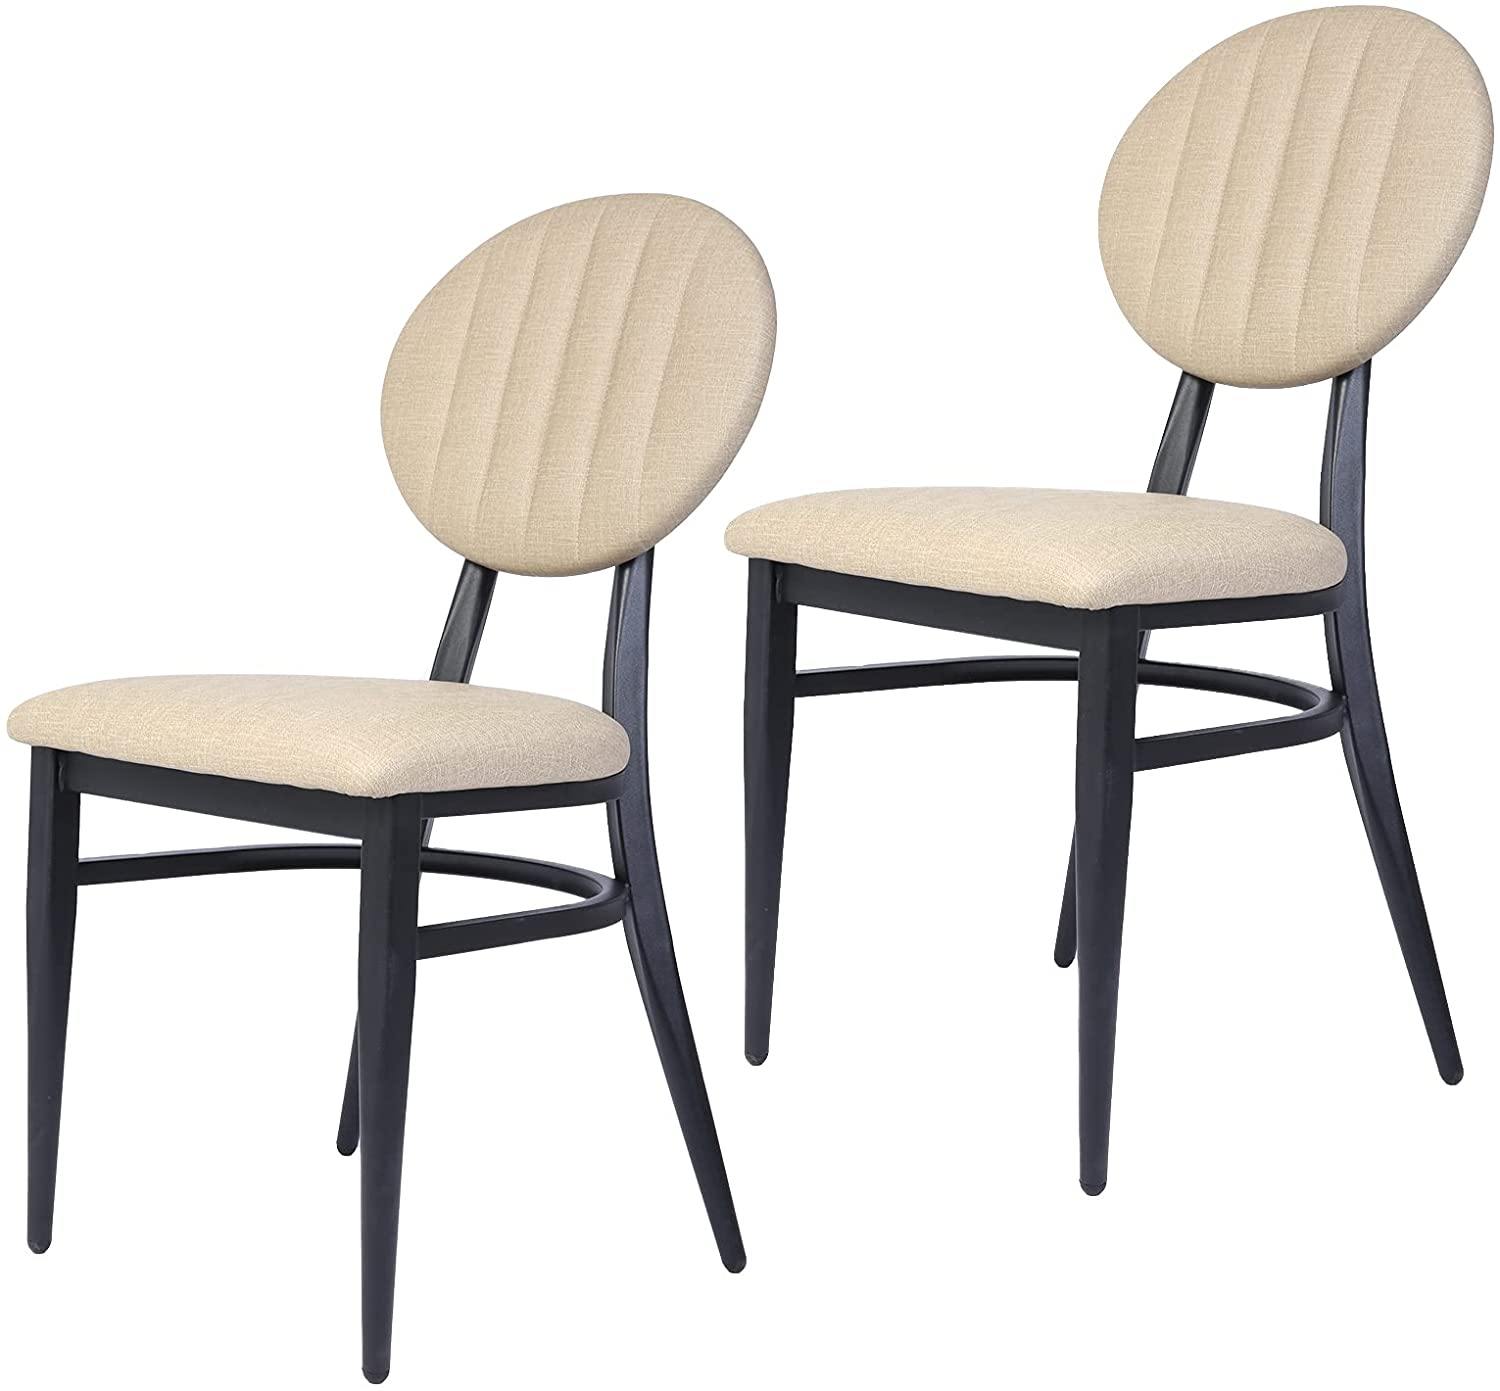 Set of 2 Mid-Century Modern Dining Room Chair w/Round Striped Back Cushion Metal Frame Classy Kitchen Side Chair Simple Dining Chair - Bosonshop